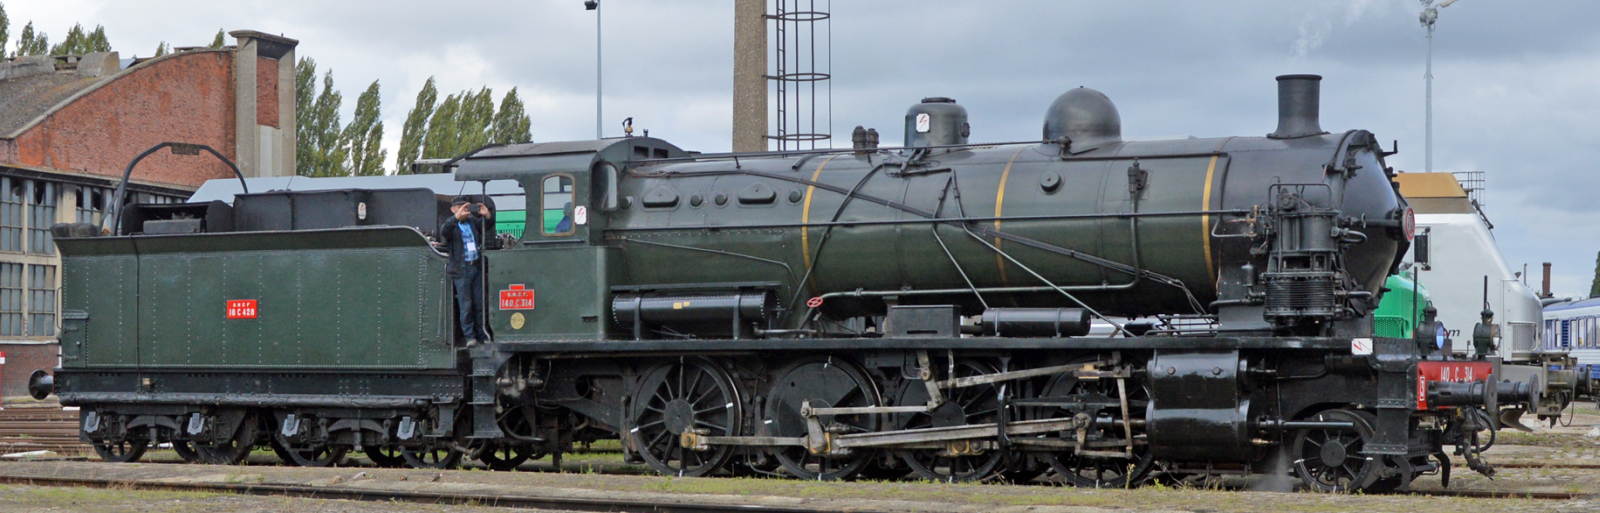 3-140 C 314 in October on the turntable in Longueau